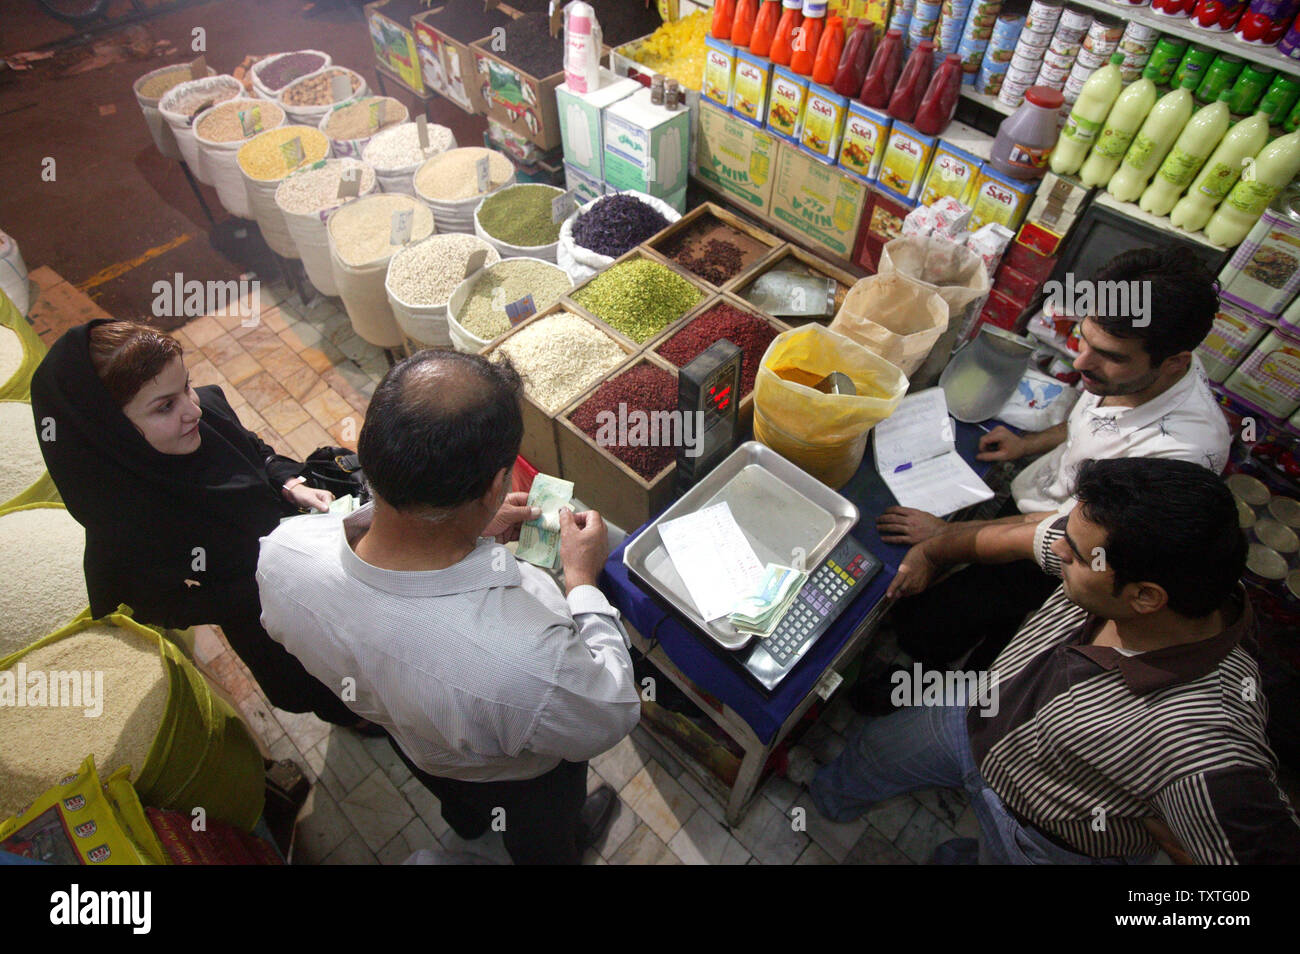 Iranians shop in the bazaar in Qazvin Province, 91 Miles (165 Km) west of Tehran, Iran on August 28, 2008. Iran's supreme leader called on the government of President Mahmoud Ahmadinejad to work on controlling rising prices, the main gripe among Iranians who fret about inflation now running at about 26 percent, state media reported. (UPI Photo/Mohammad Kheirkhah) Stock Photo